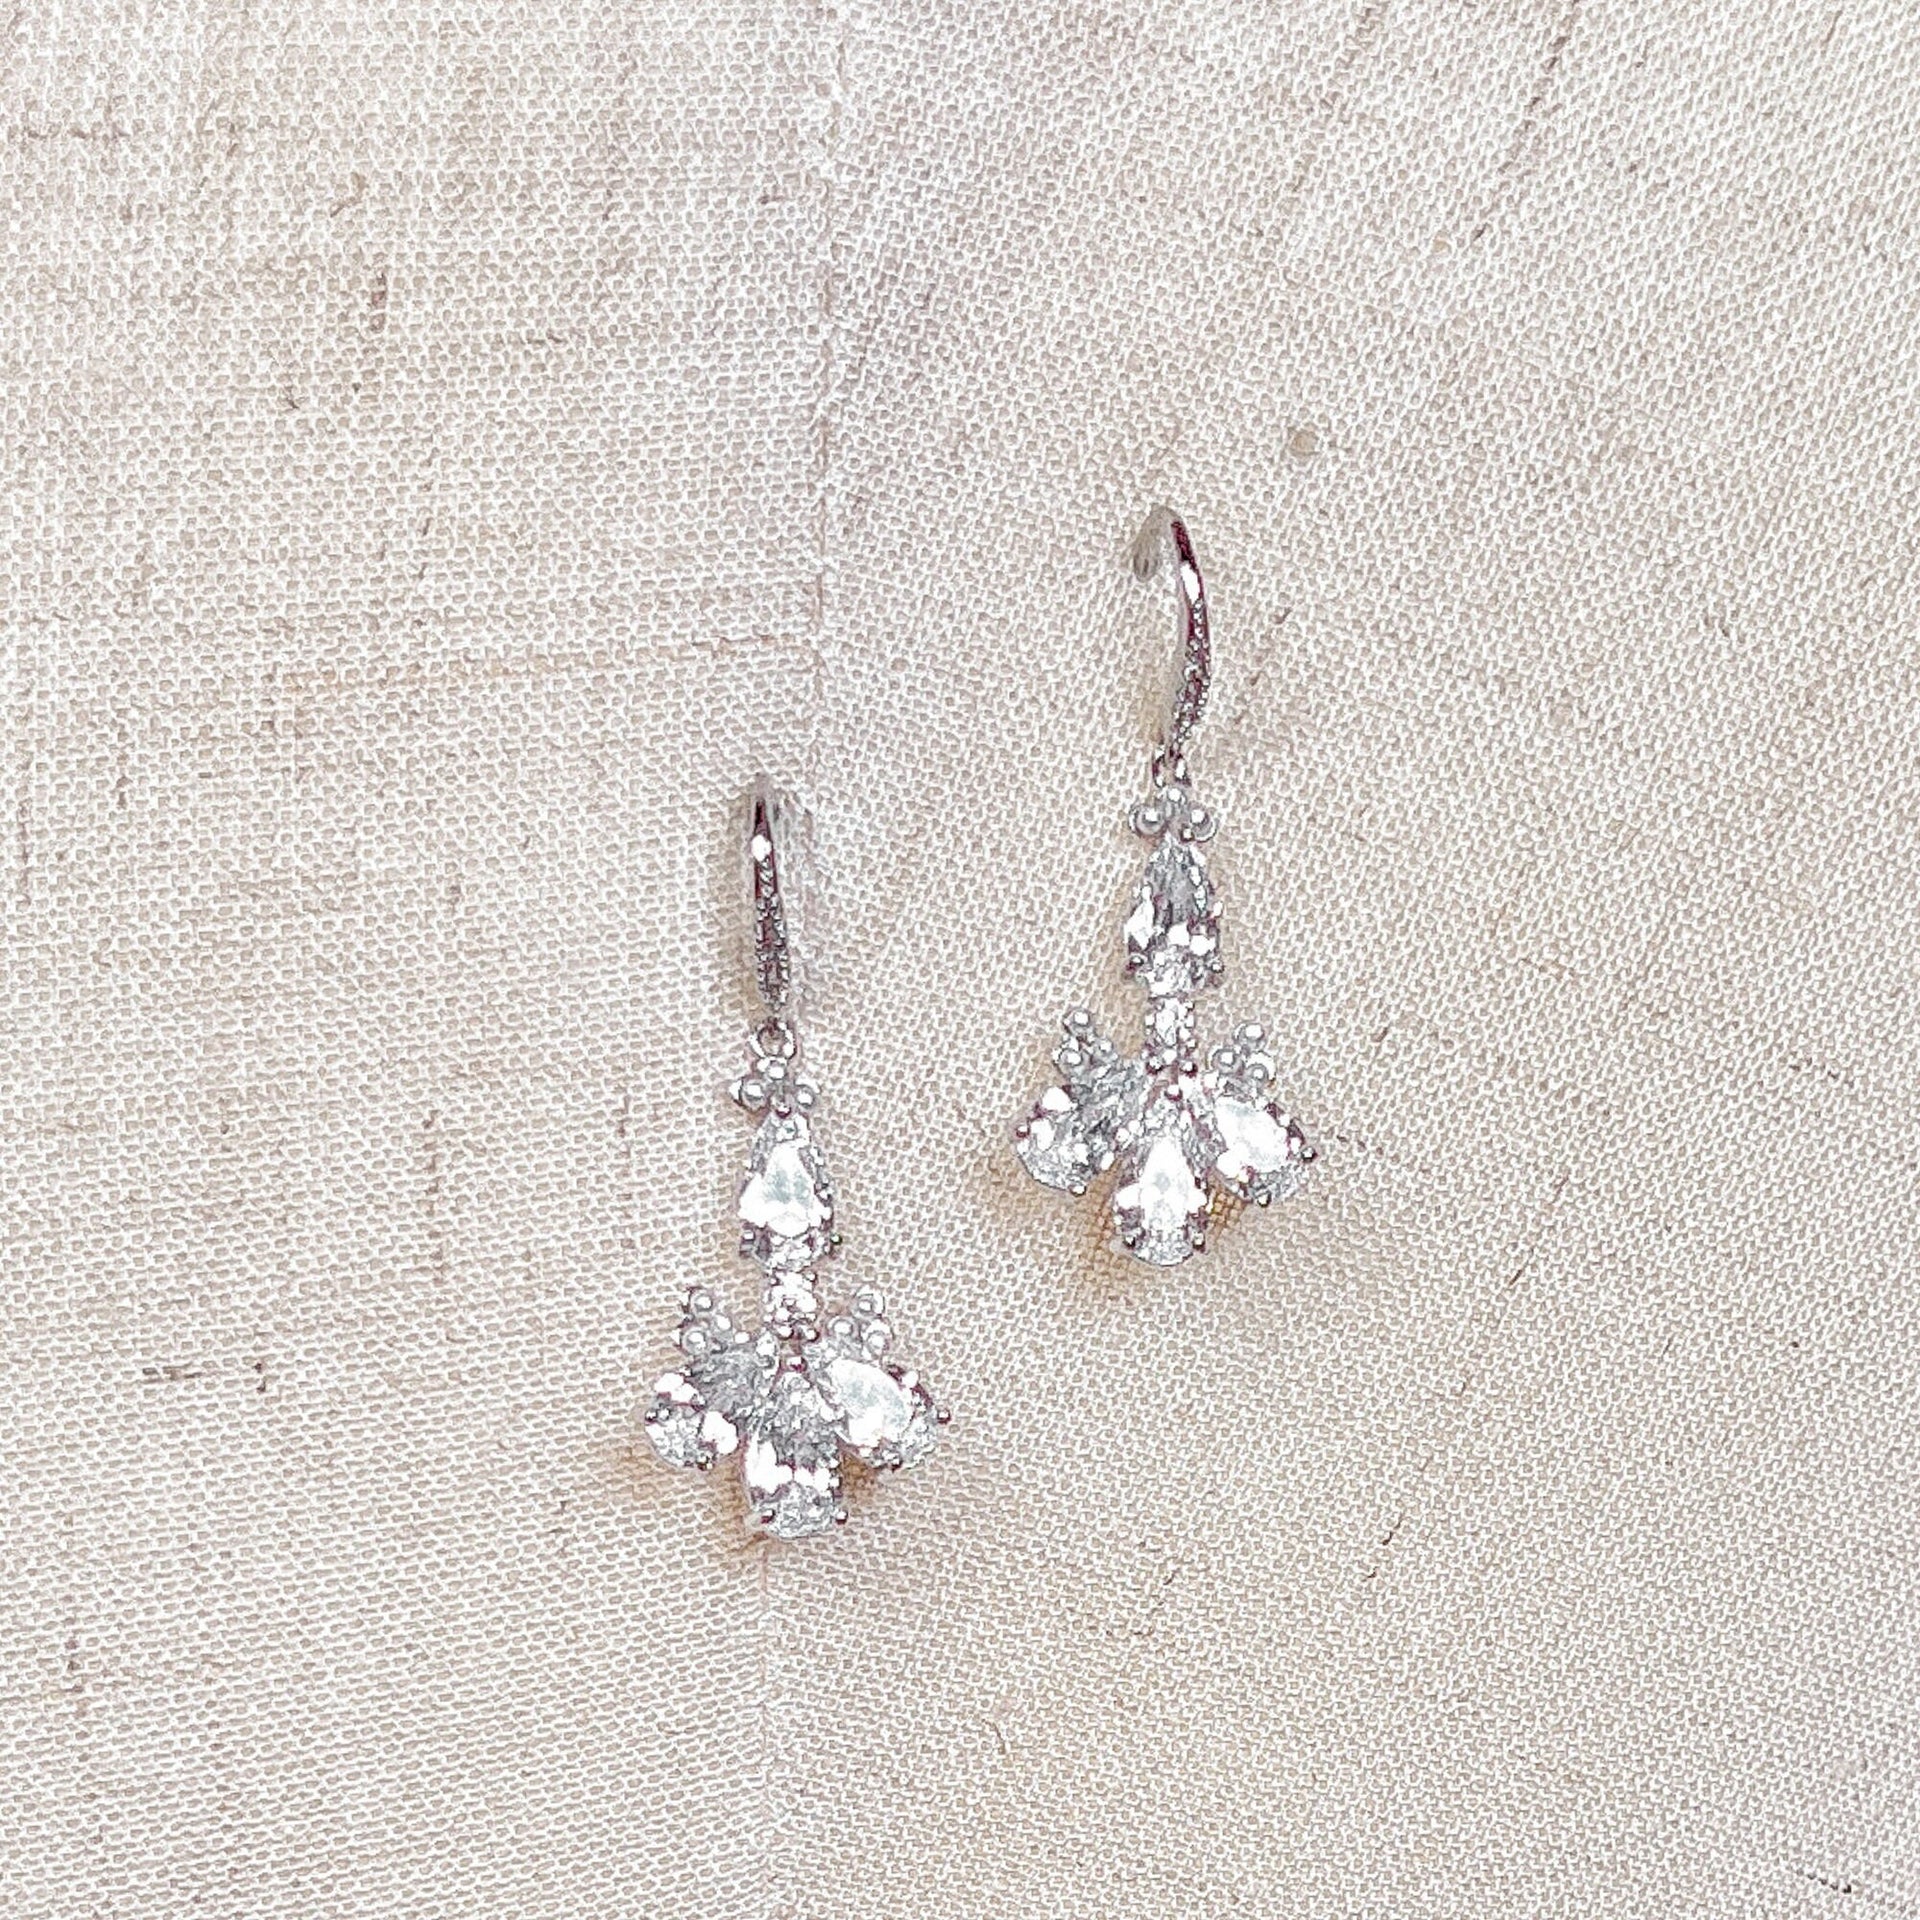 Delicate CZ and Pearl Earrings